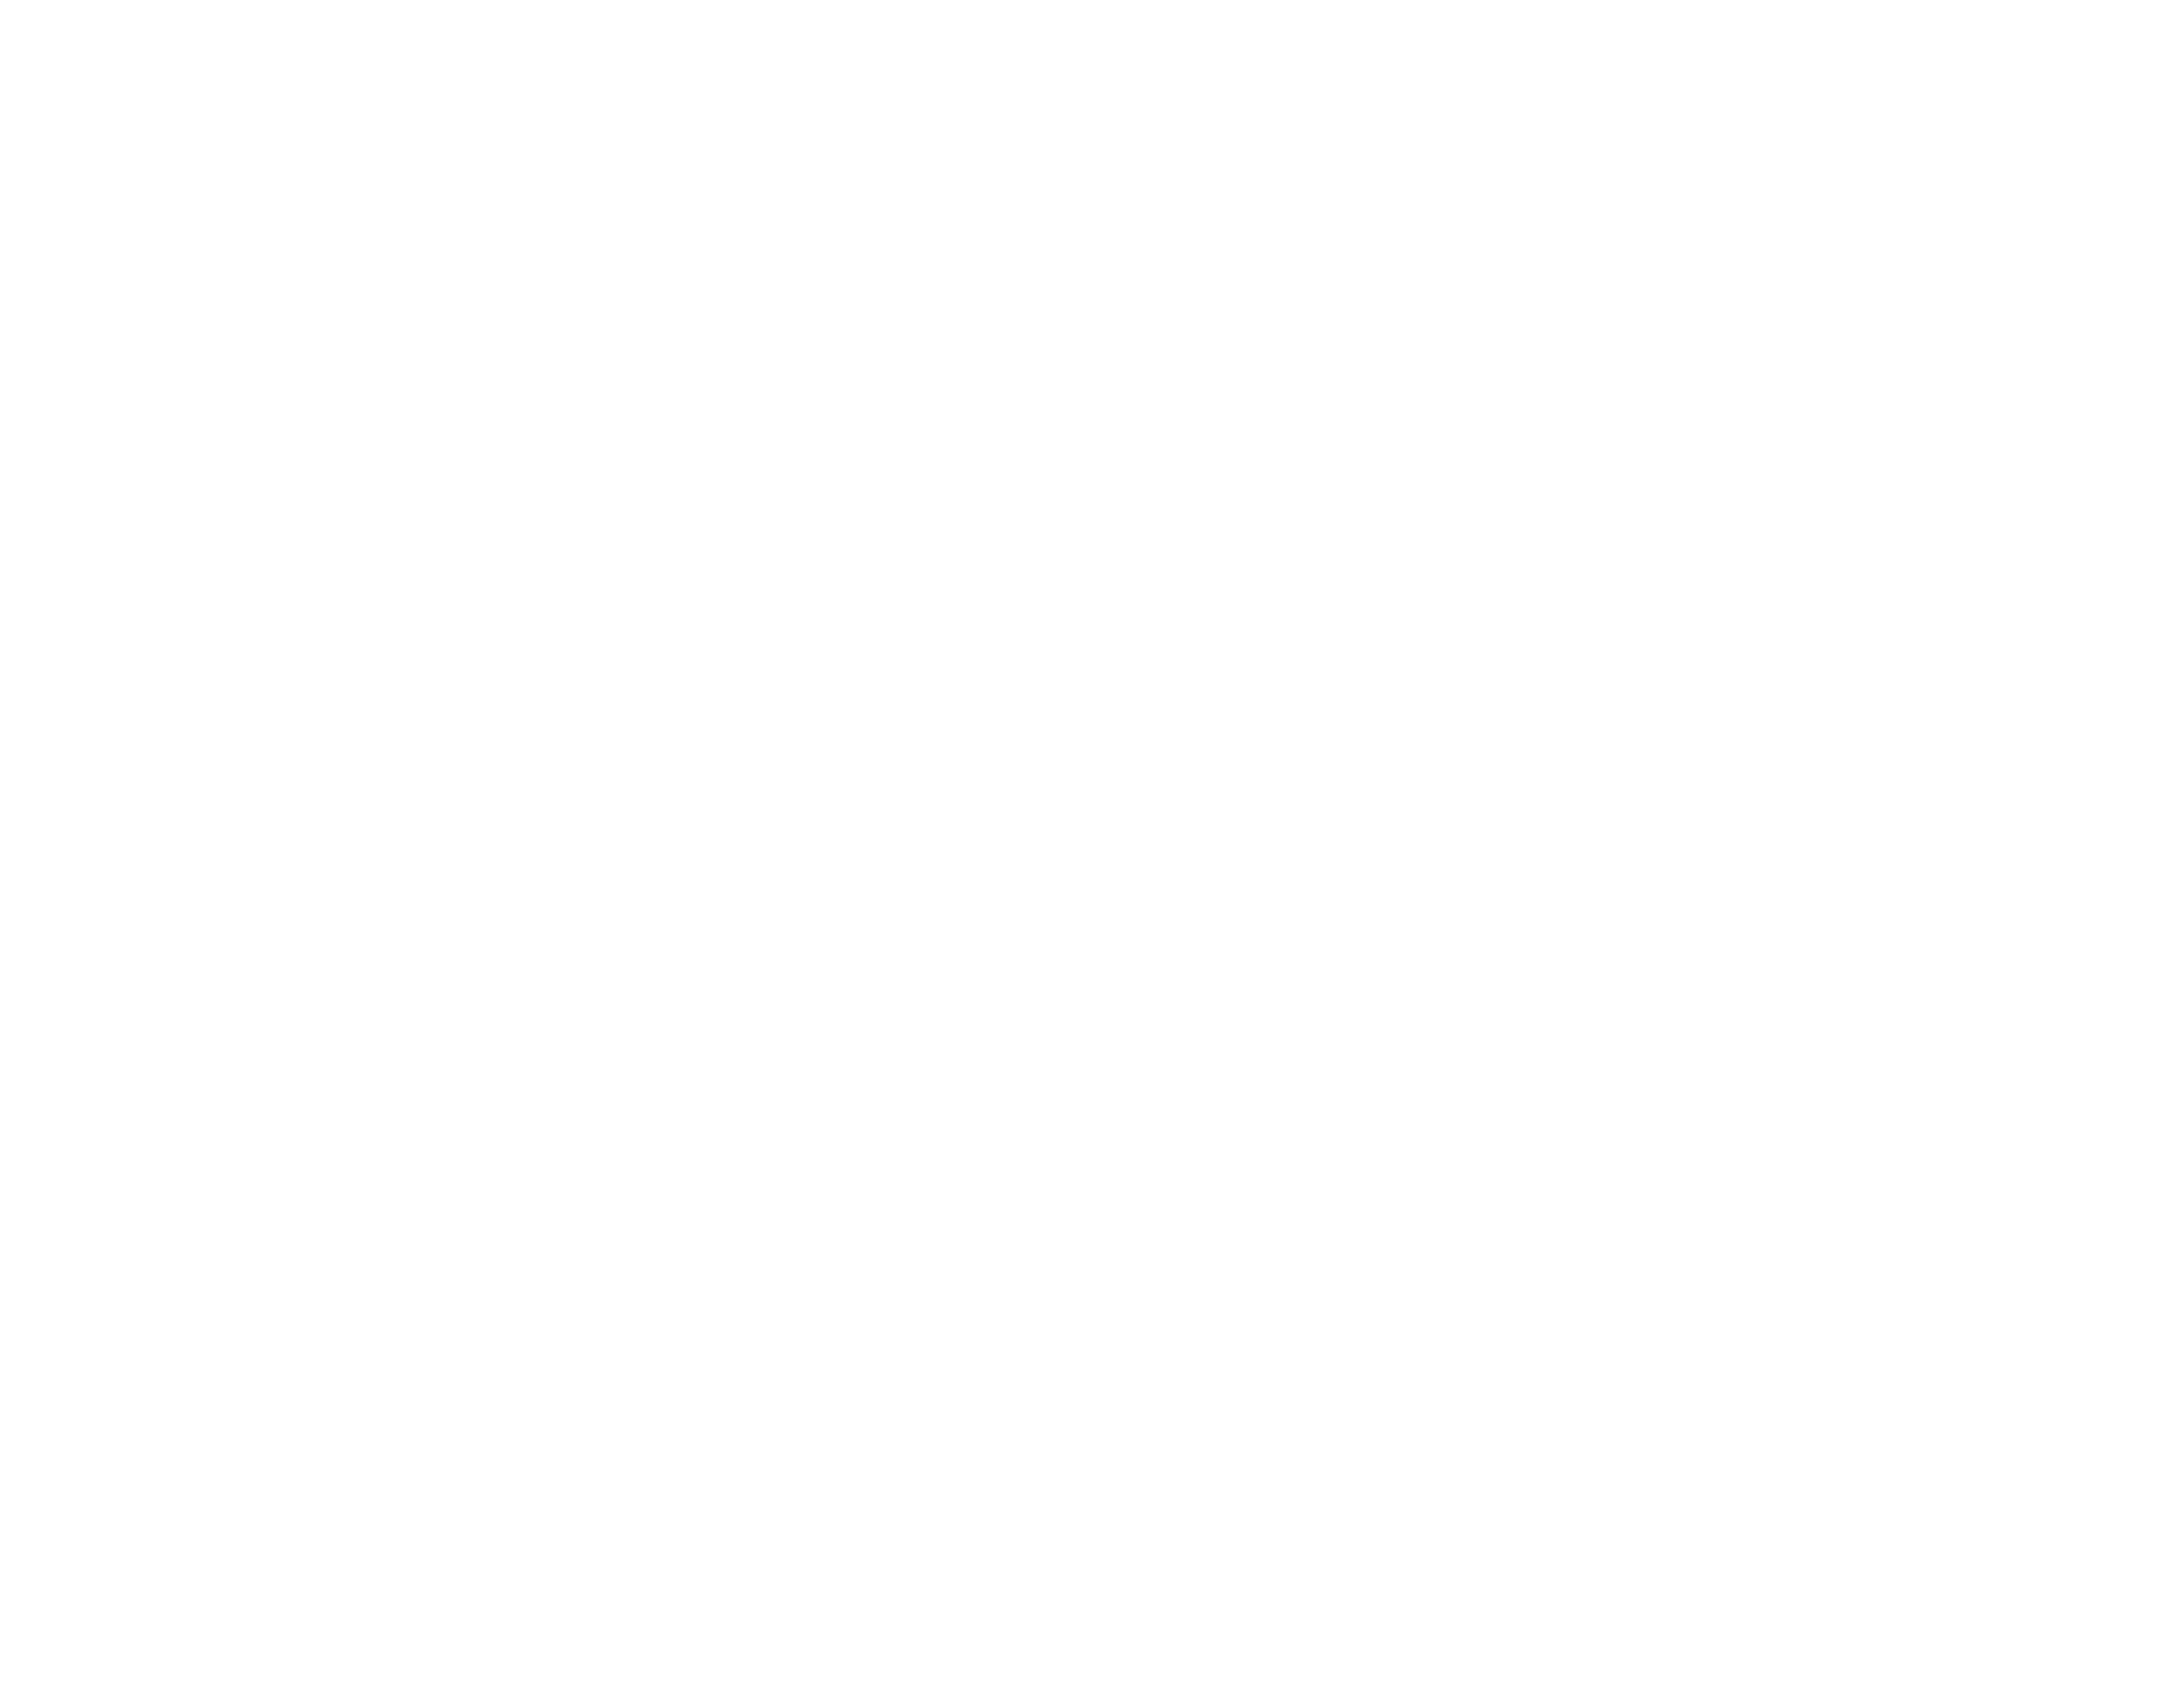 BOLT ACTION COFFEE